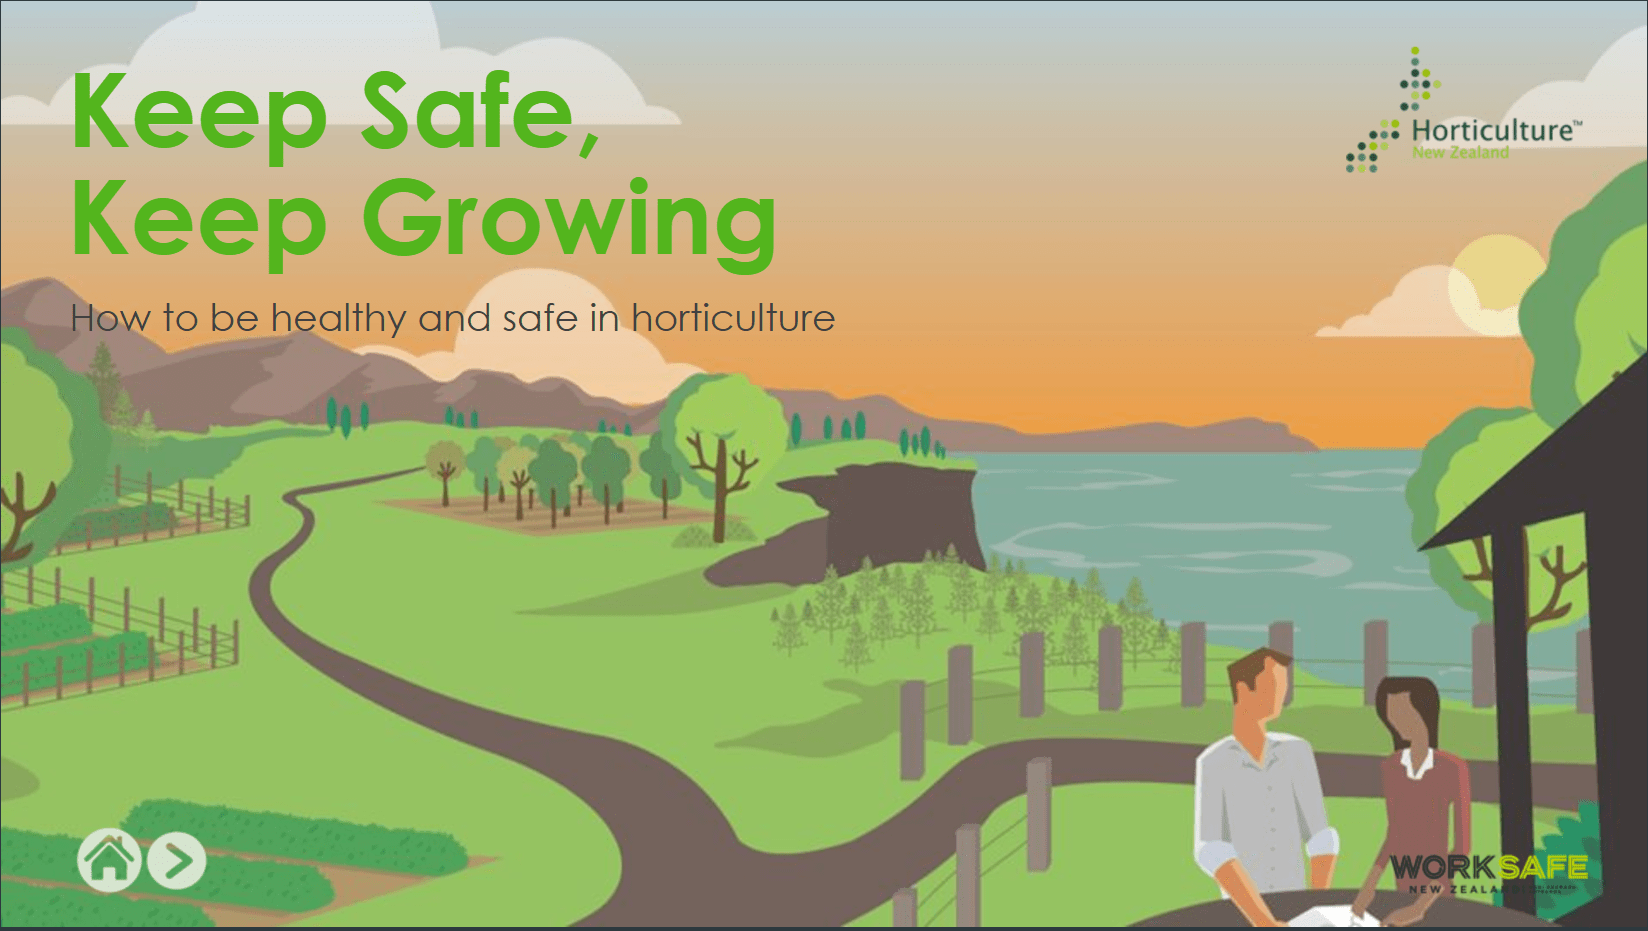 Keep Safe, Keep Growing - how to be healthy and safe in horticulture